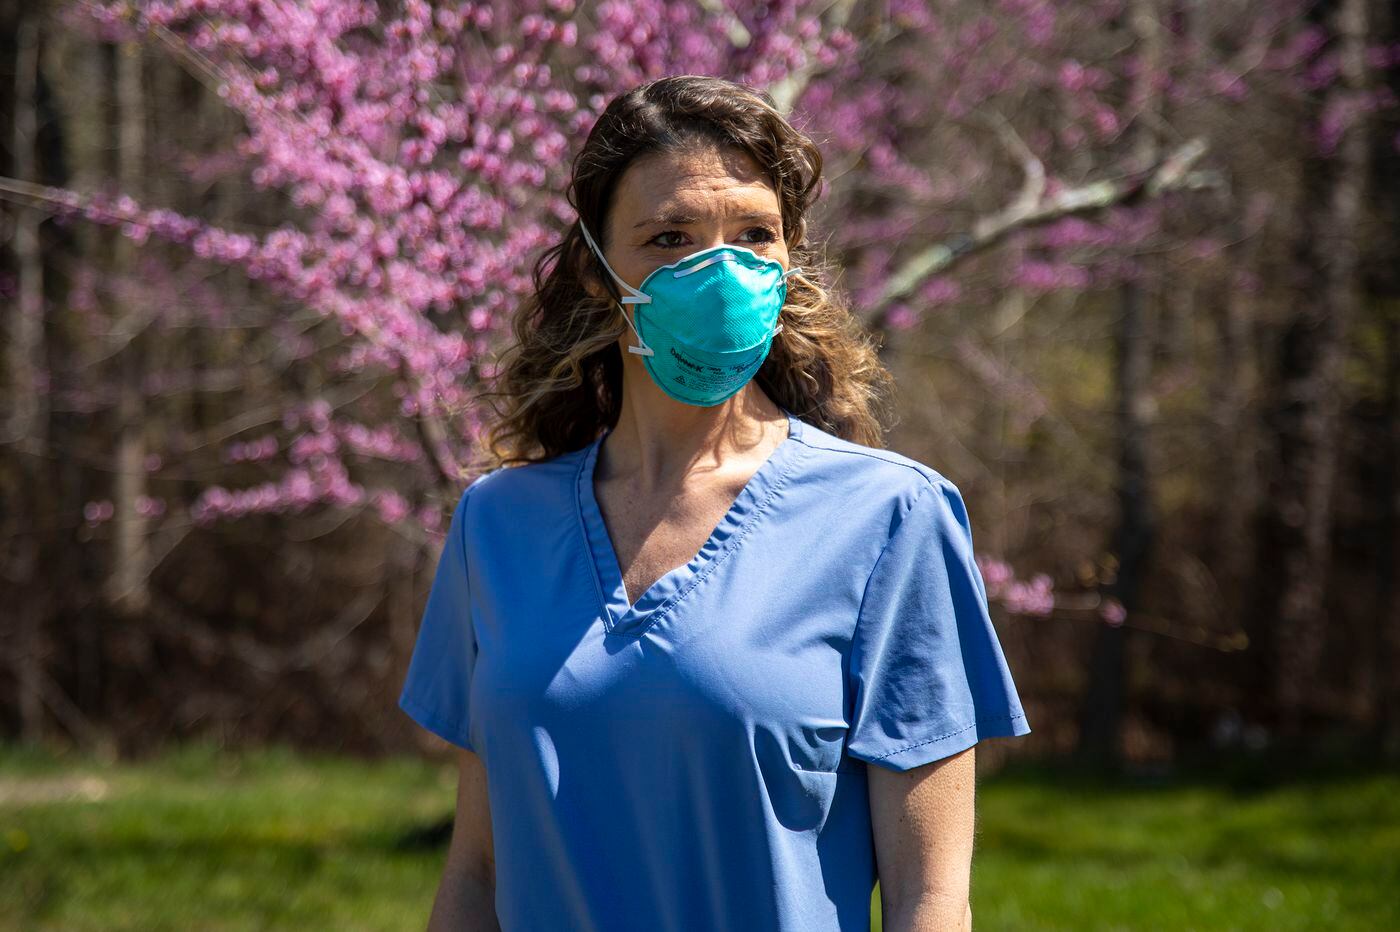 Coronavirus 3m Maker Of The N95 Mask Files Lawsuits Against Alleged Price Gougers